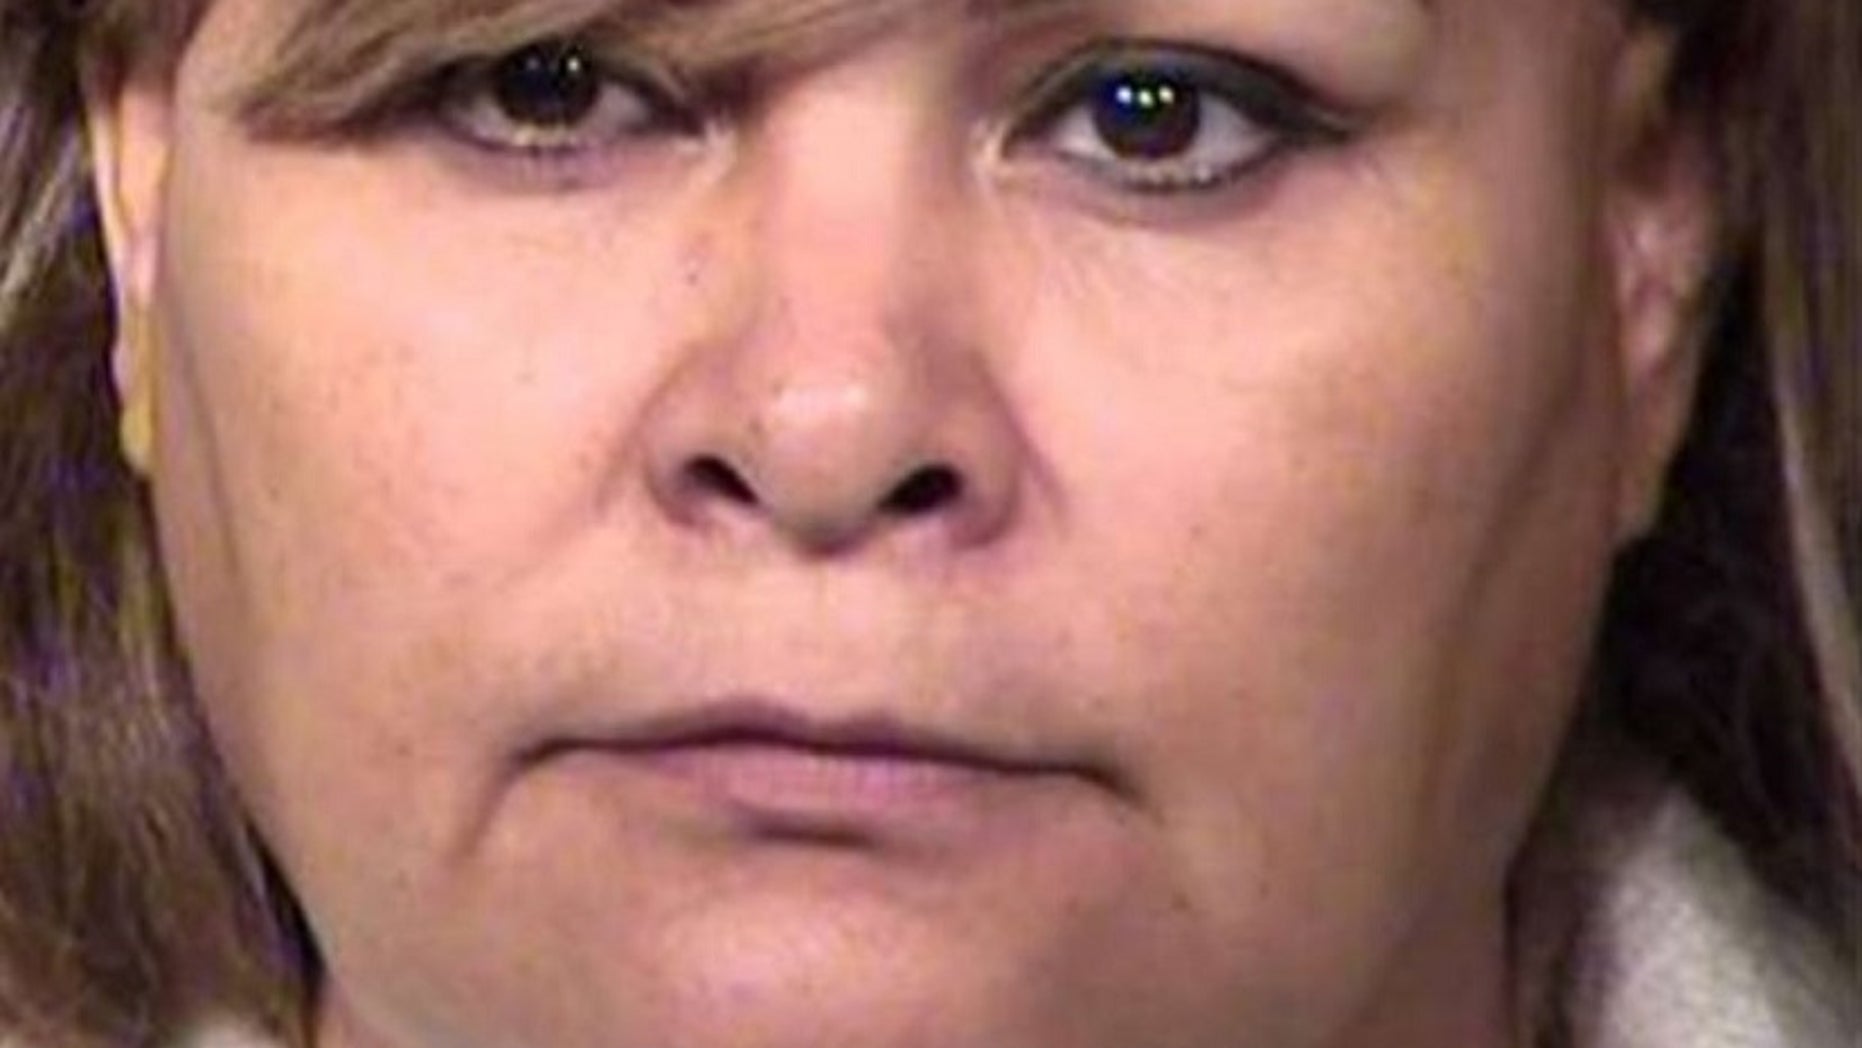 Housekeeper arrested for allegedly stealing $88,000 ring: report